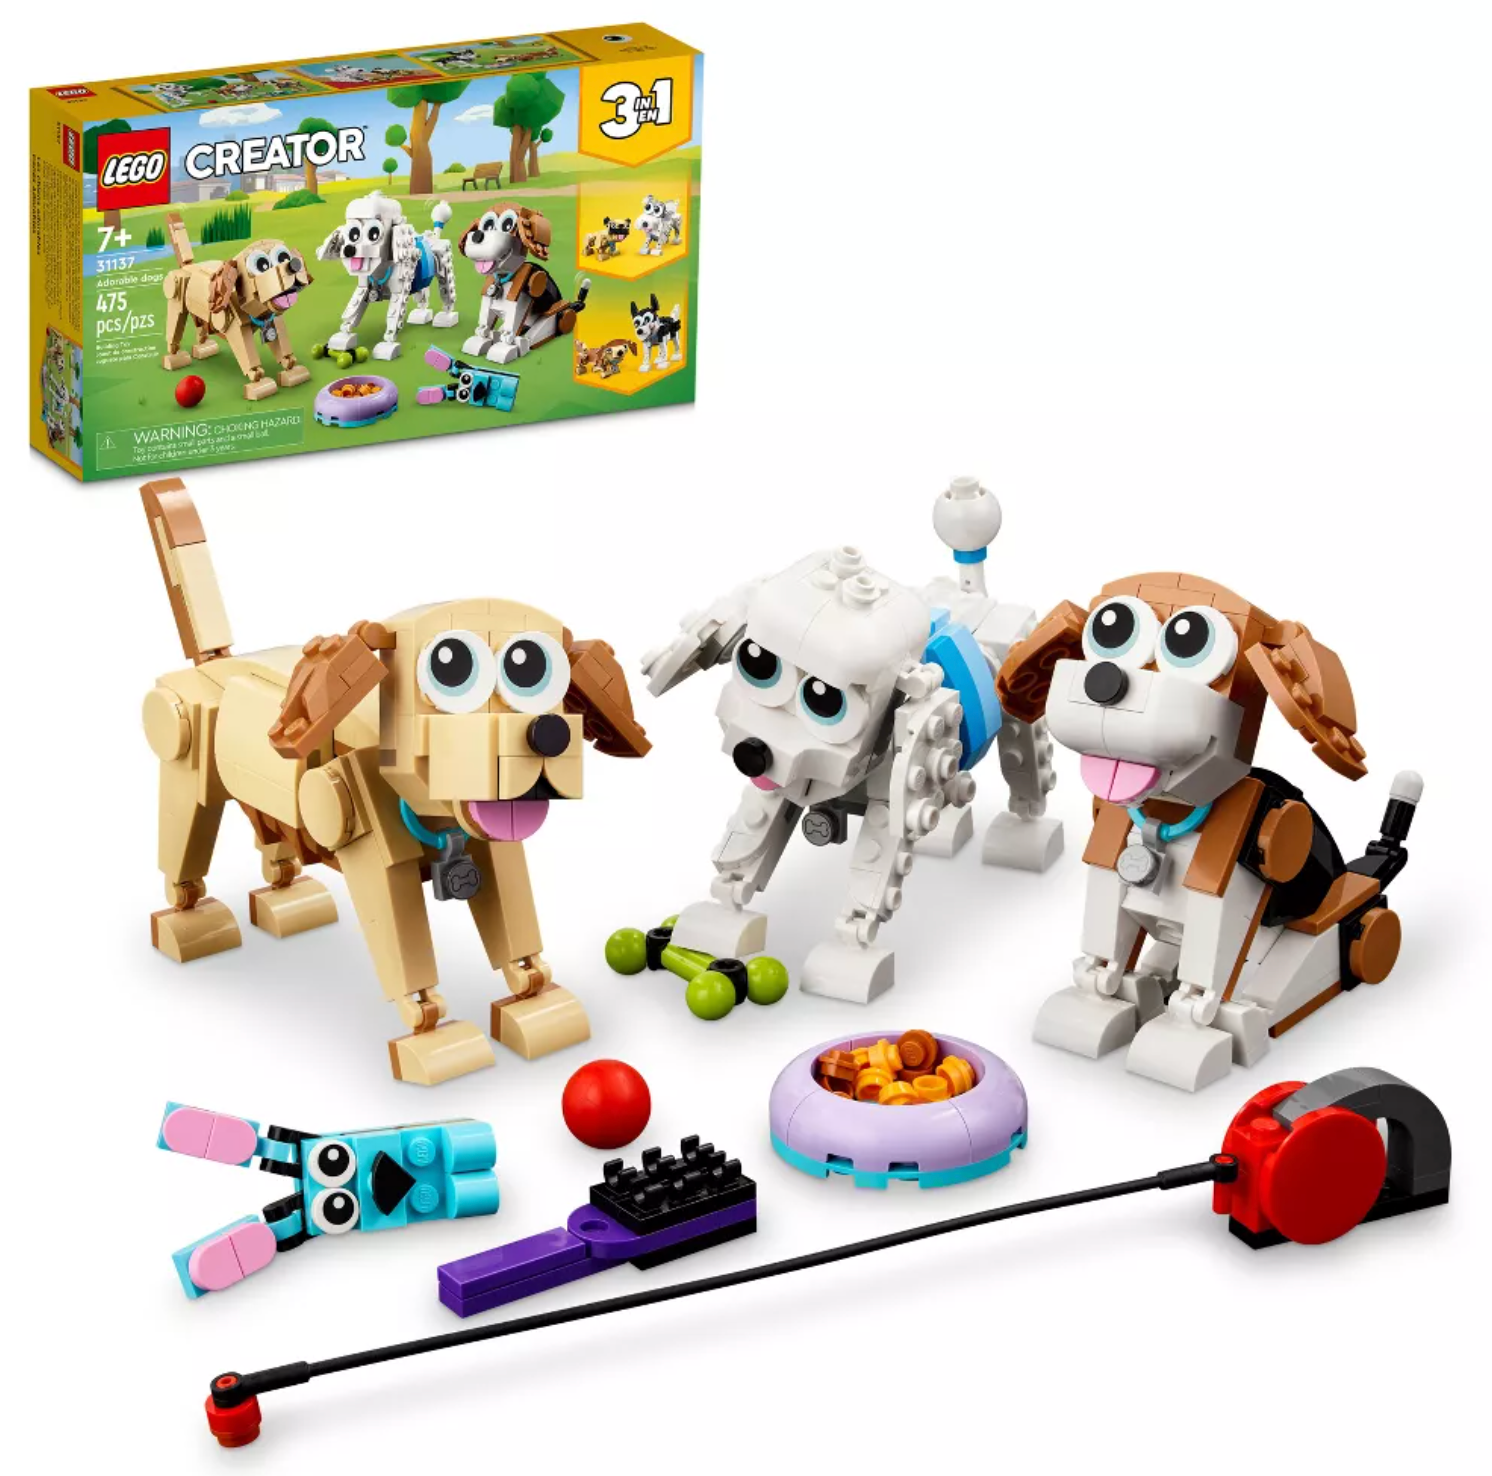 LEGO Creator 3 in 1 Adorable Dogs Animal Figures Toys 3113